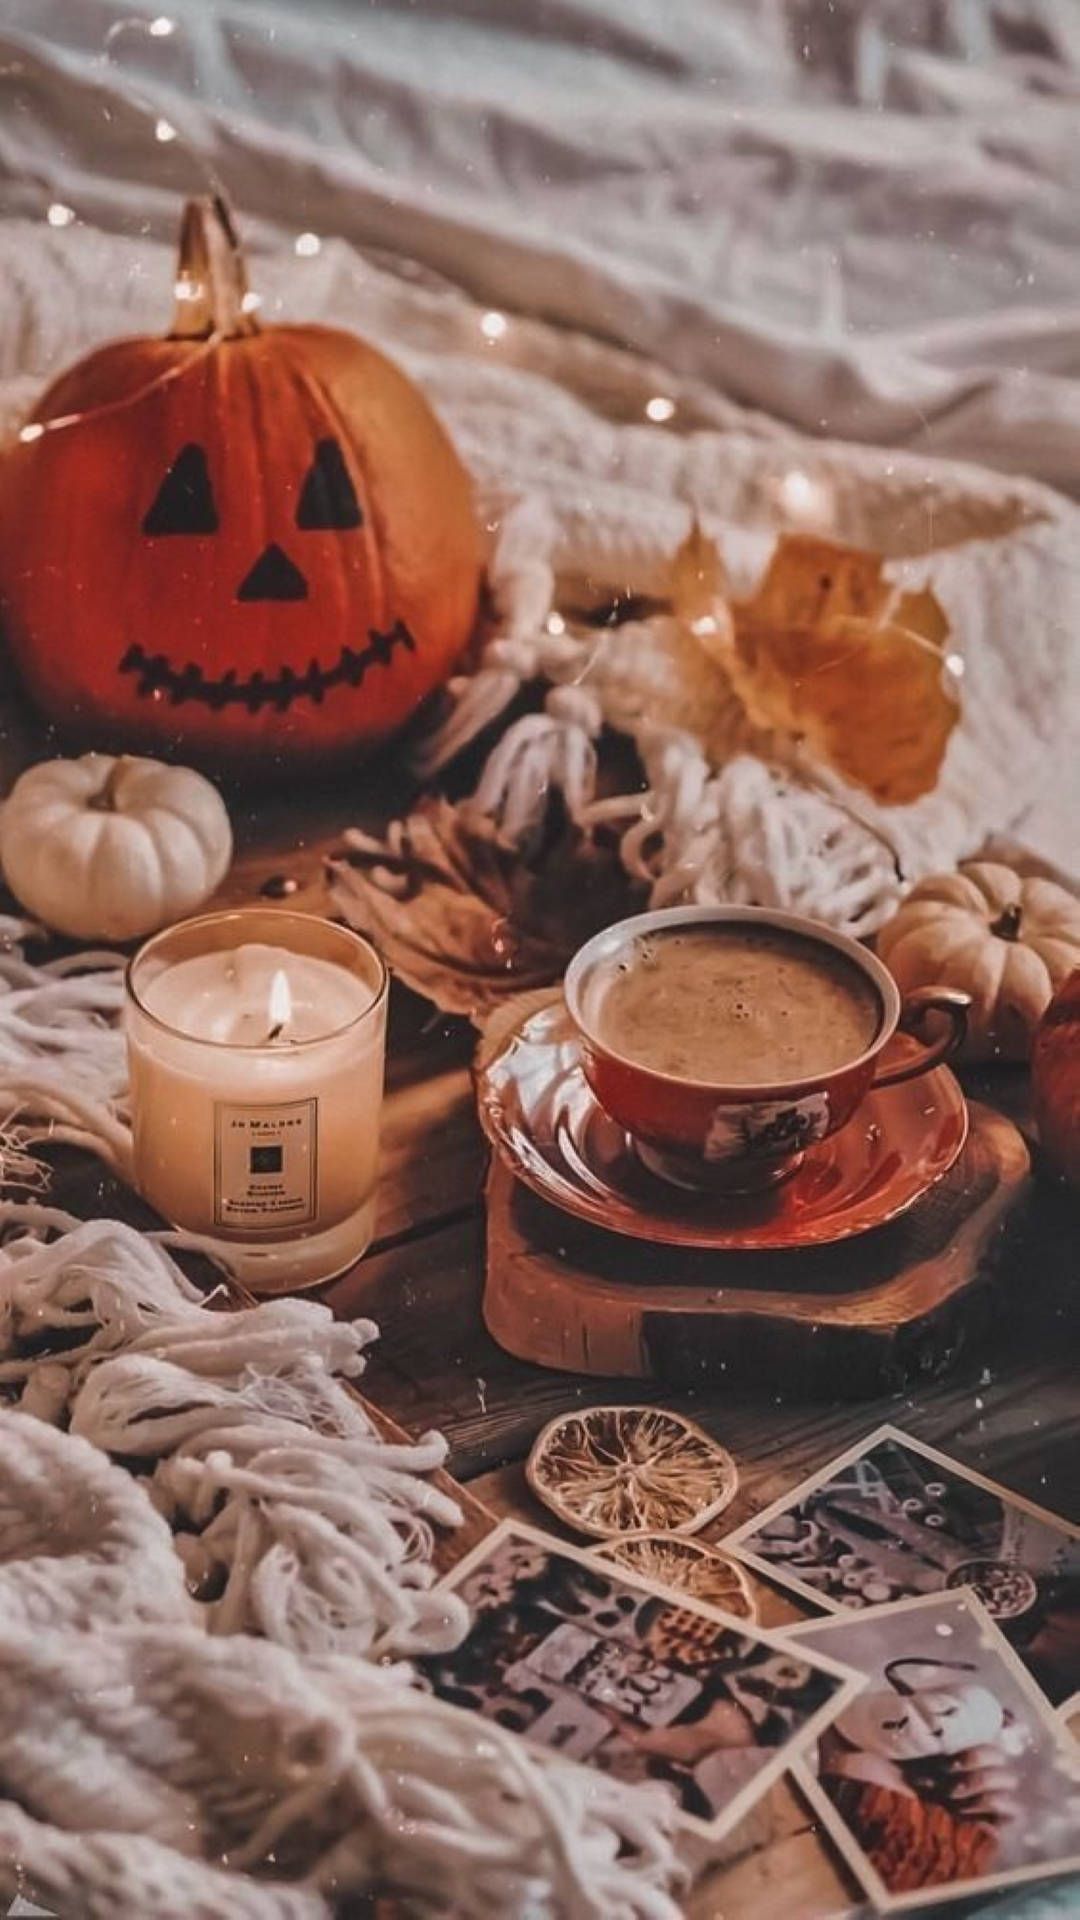 A pumpkin, candles and coffee on the bed - Halloween, coffee, pumpkin, flat lay